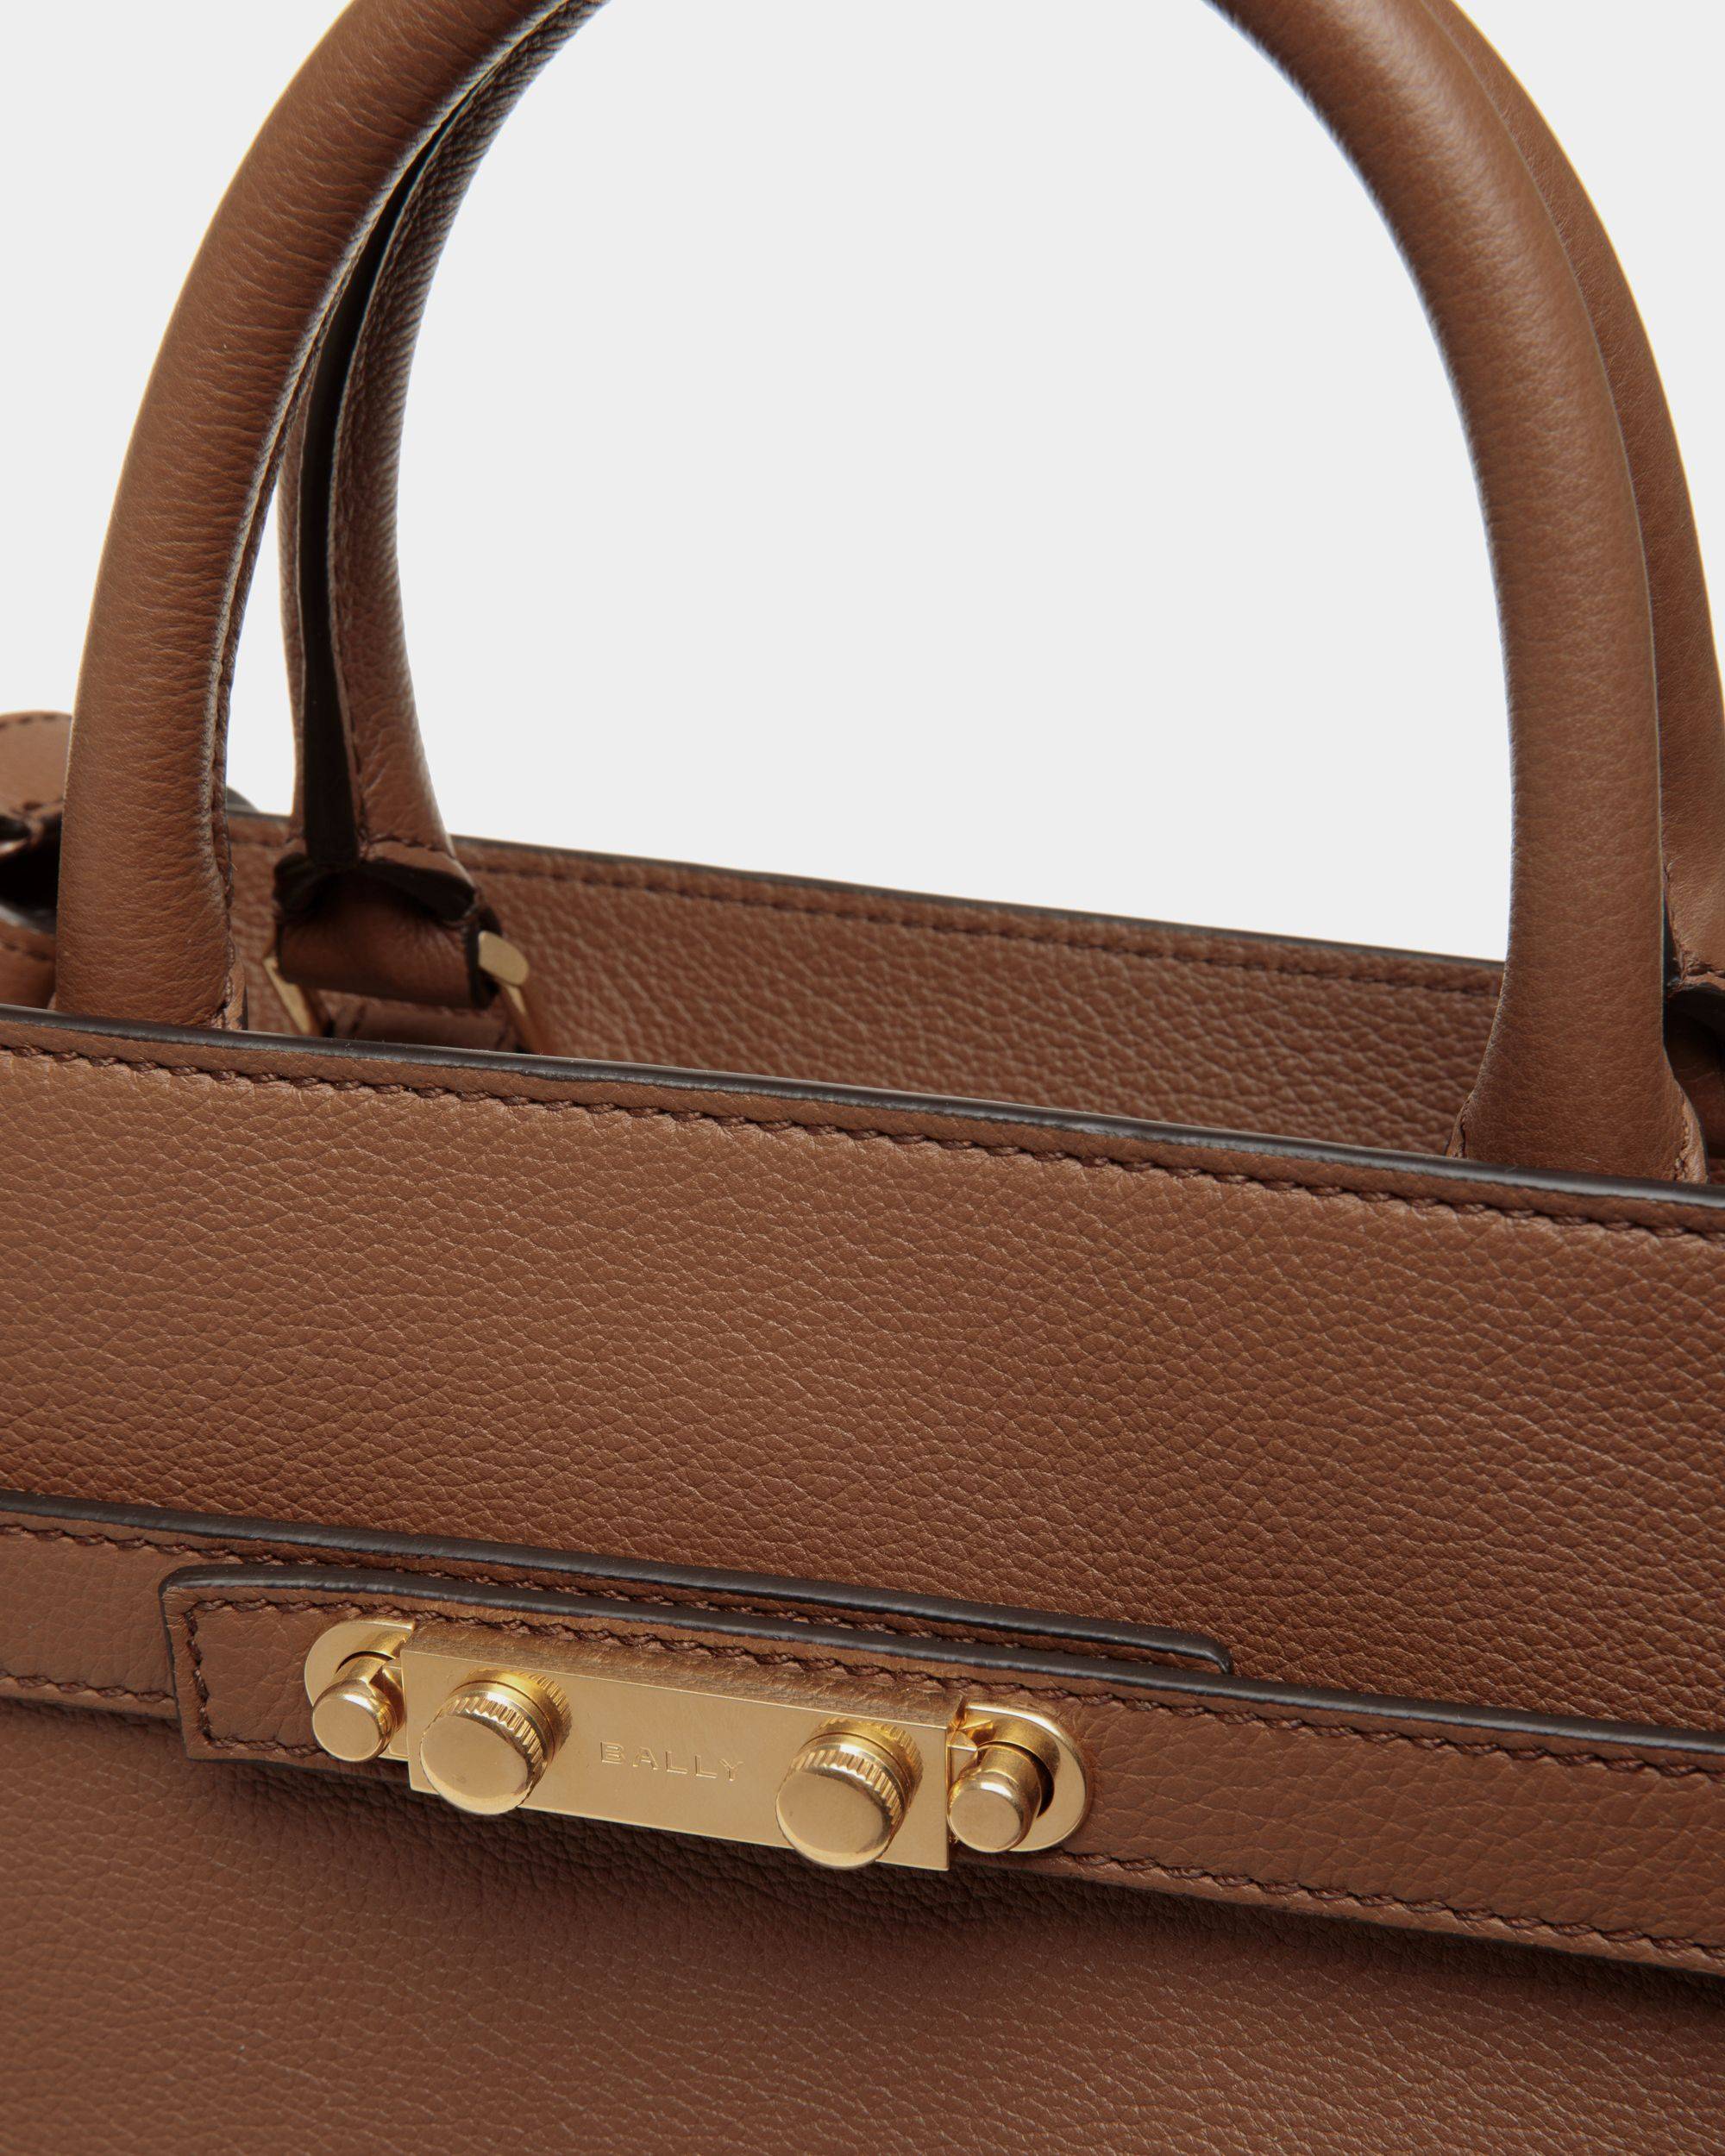 Carriage | Women's Tote Bag in Brown Leather | Bally | Still Life Detail